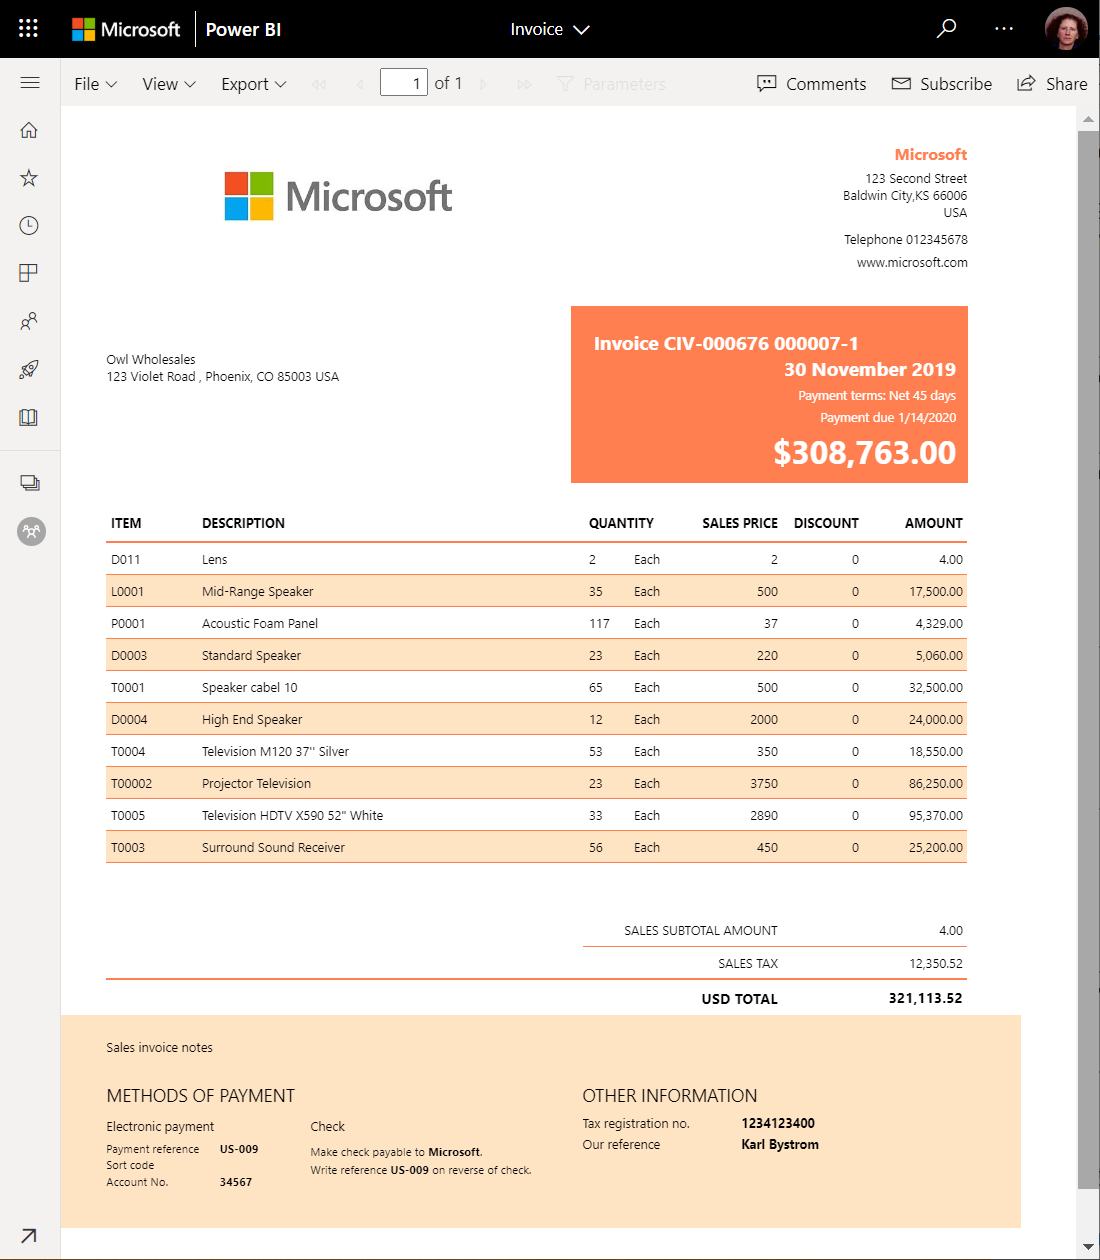 Screenshot of paginated report in the Power B I service.